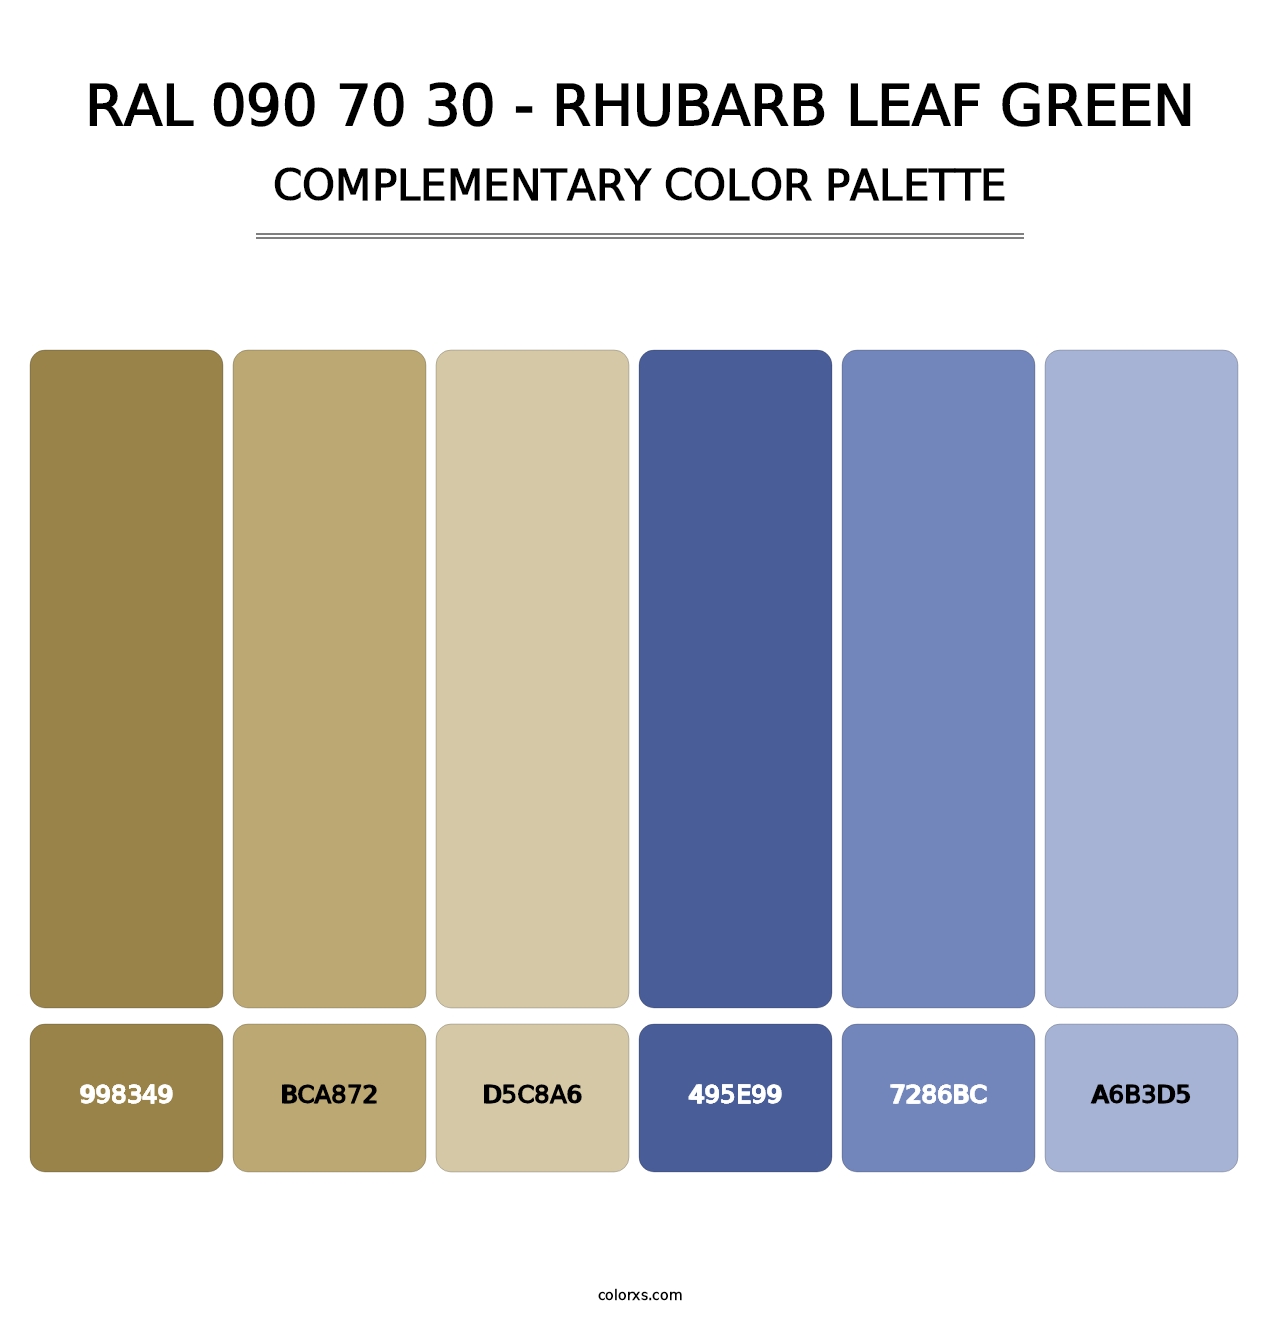 RAL 090 70 30 - Rhubarb Leaf Green - Complementary Color Palette